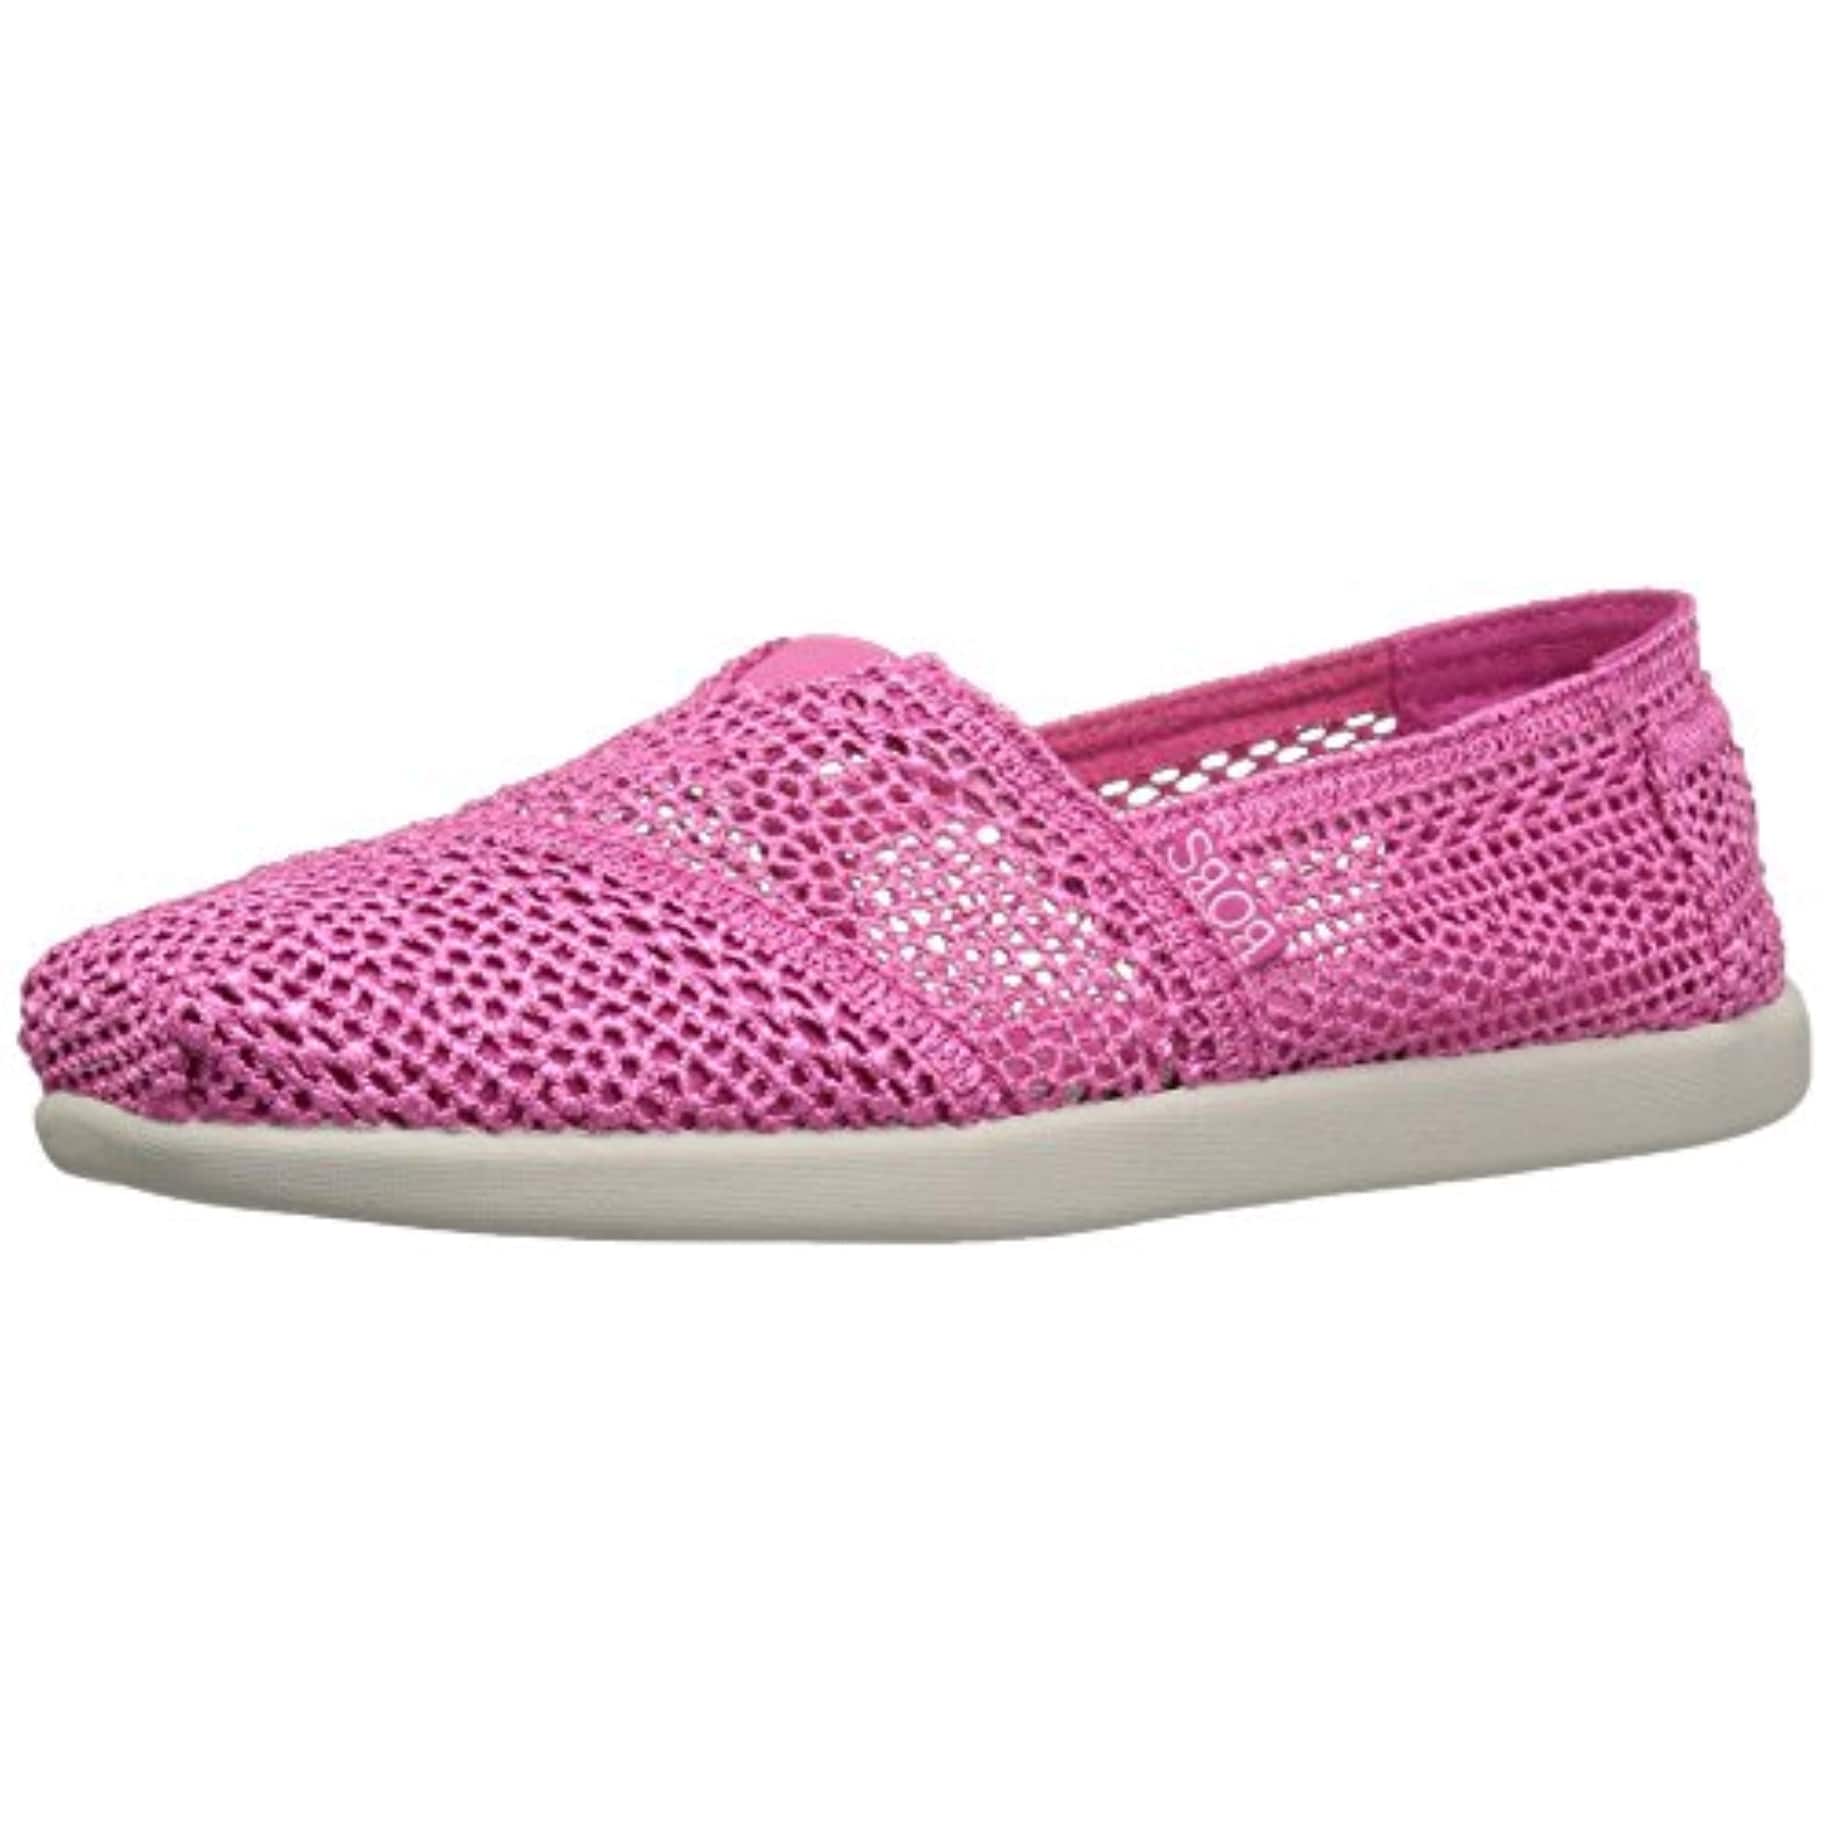 skechers bobs daisy and dot